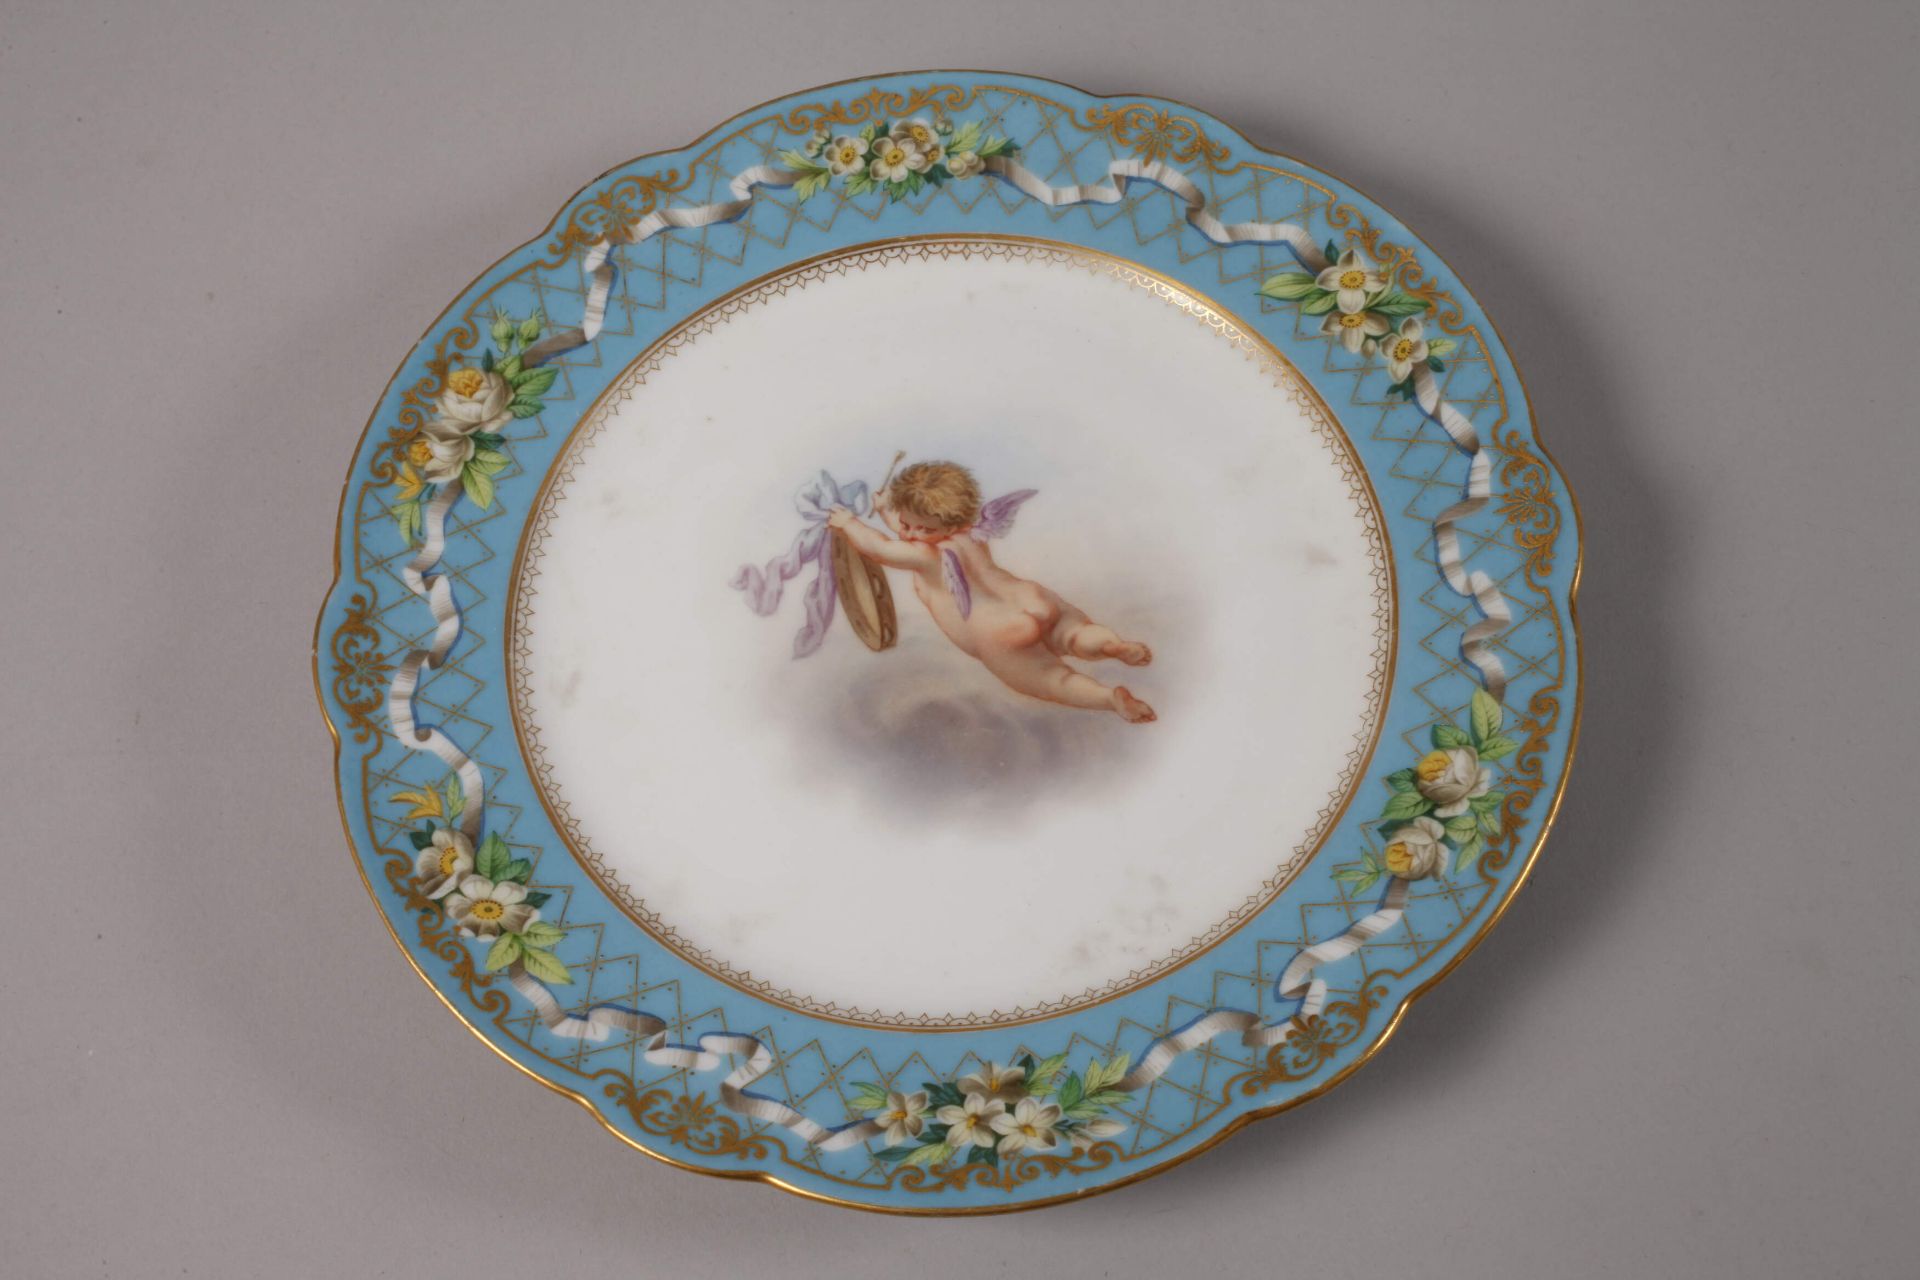 Russia six state plates with putti motif - Image 4 of 8